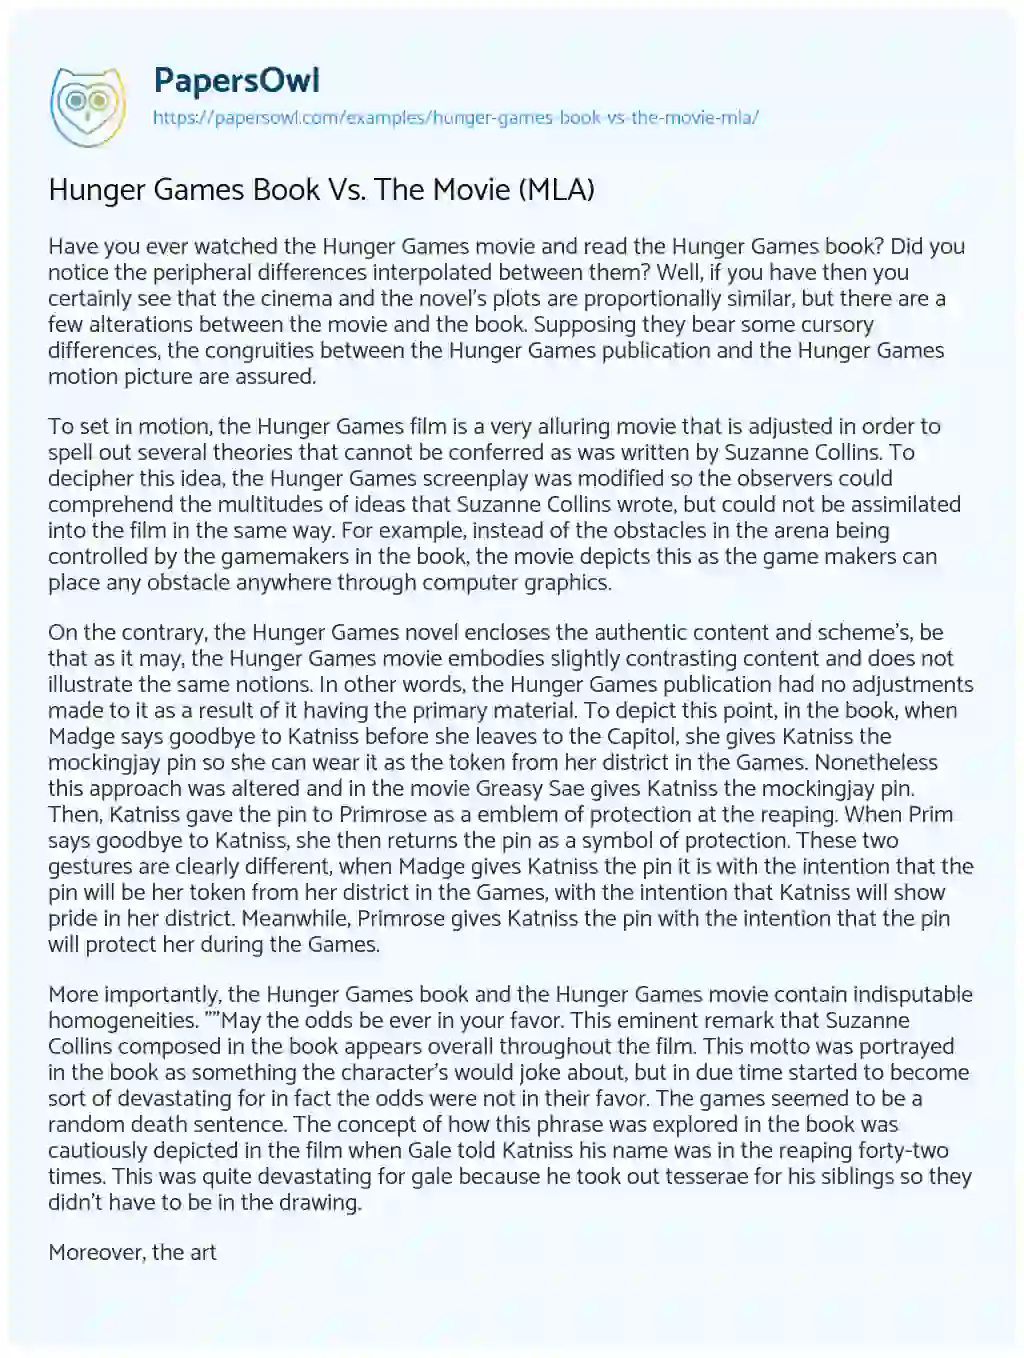 Essay on Hunger Games Book Vs. the Movie (MLA)